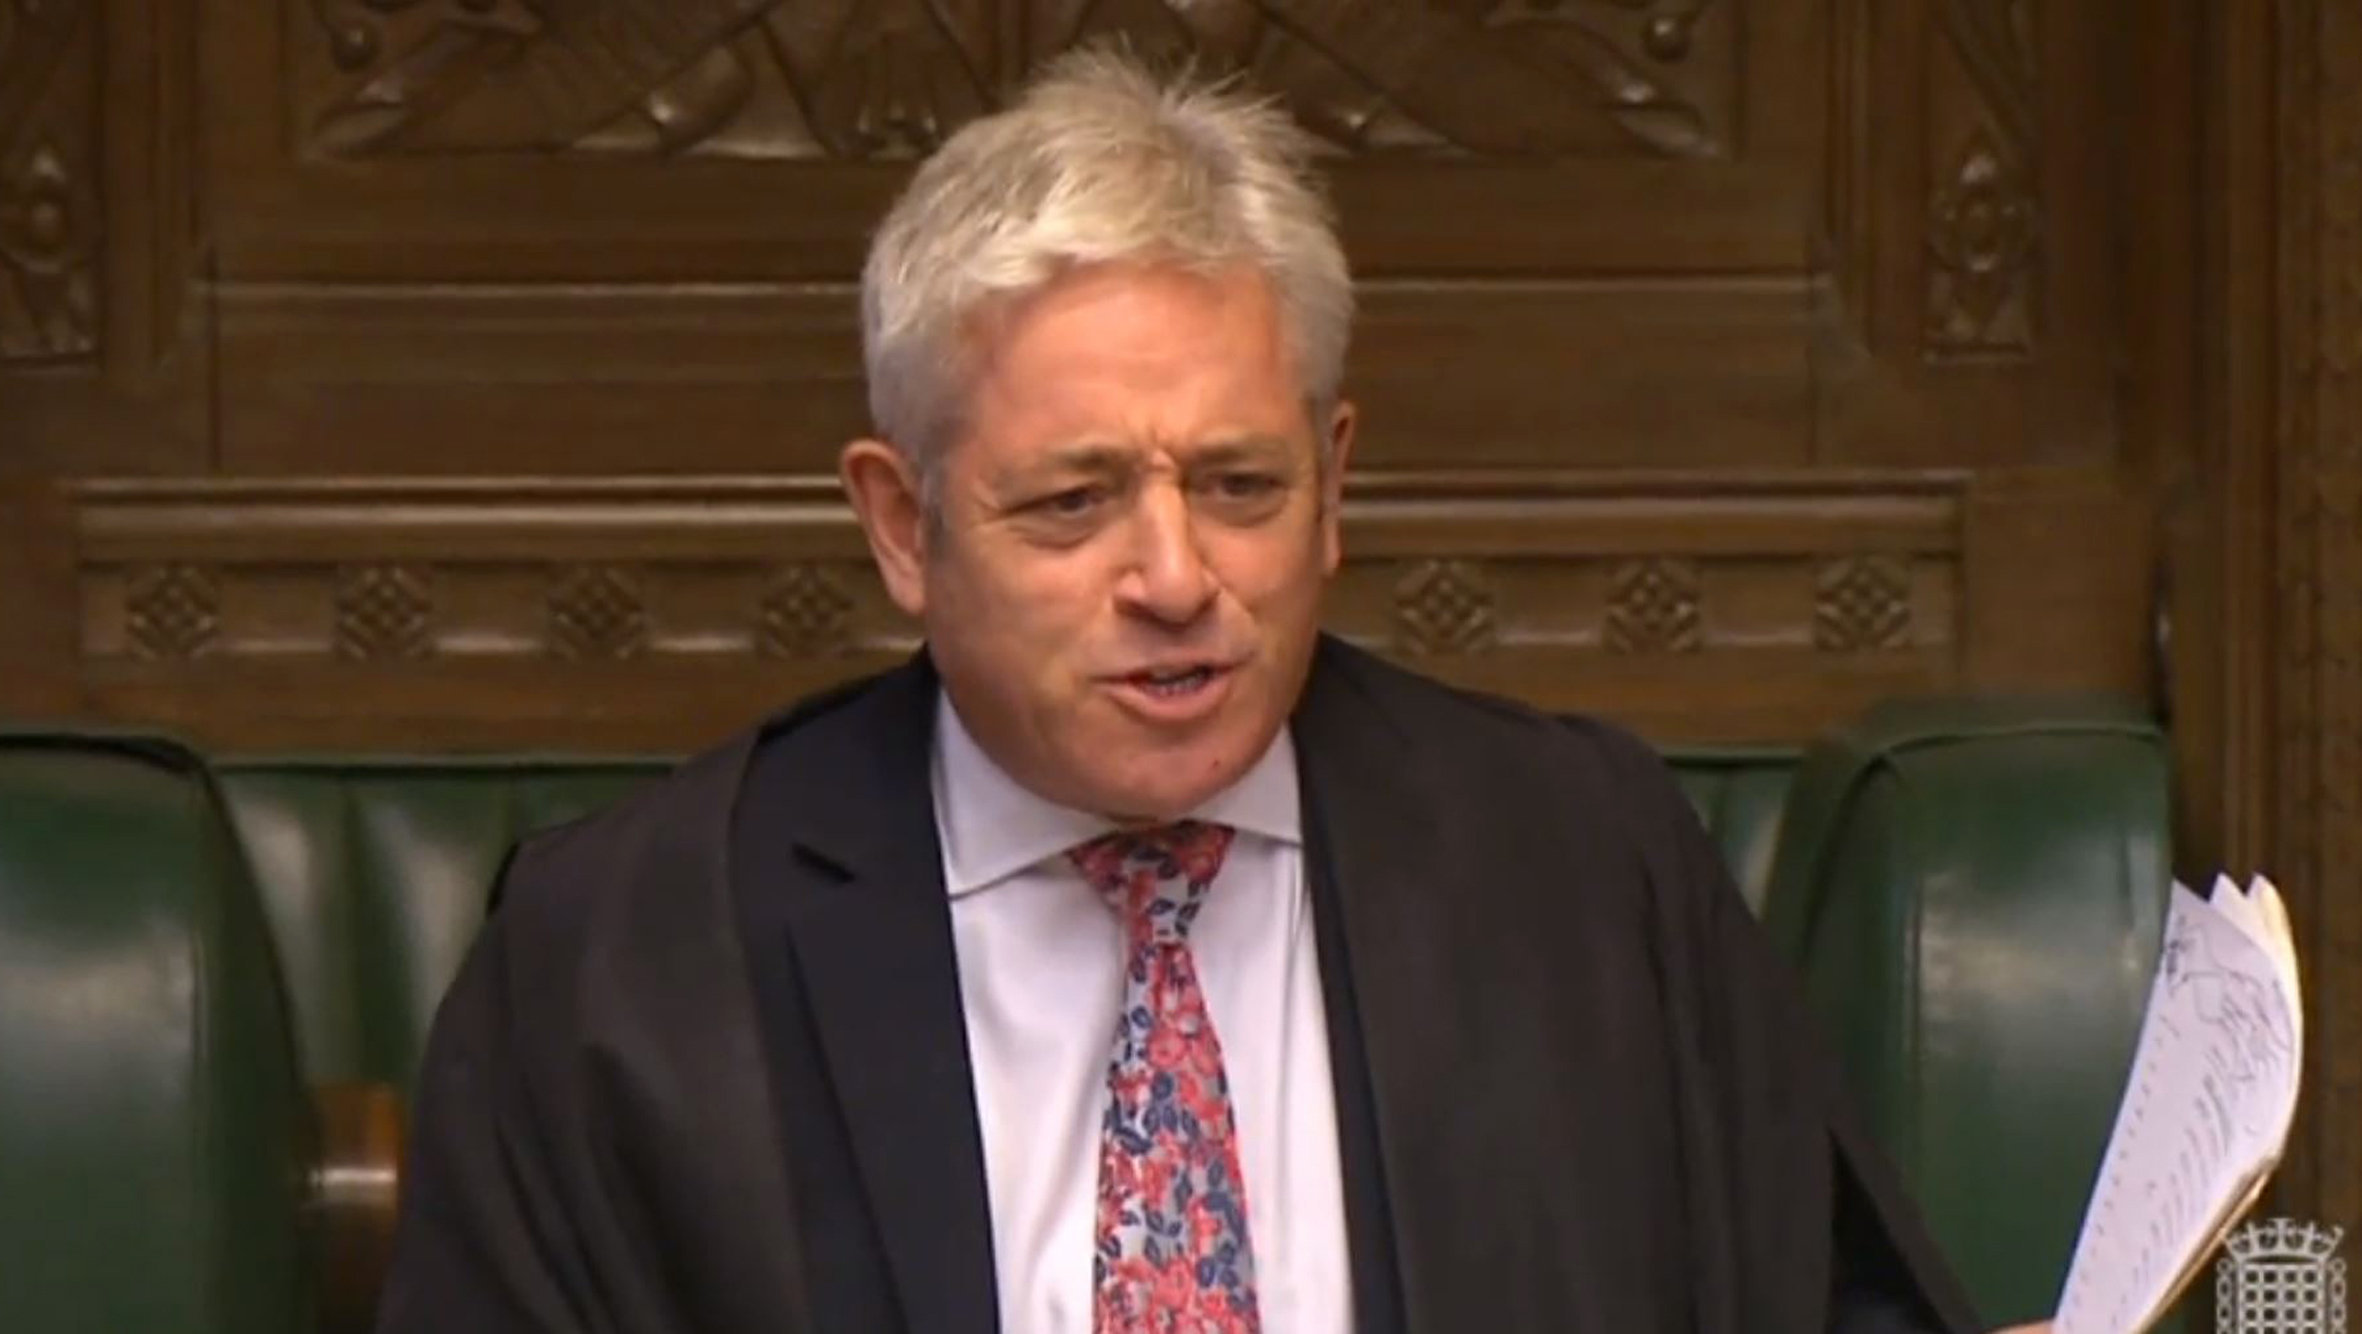 <strong>Commons Speaker John Bercow&nbsp;called for change in Parliament amid what he described as 'disturbing allegations about a culture of sexual harassment'</strong>